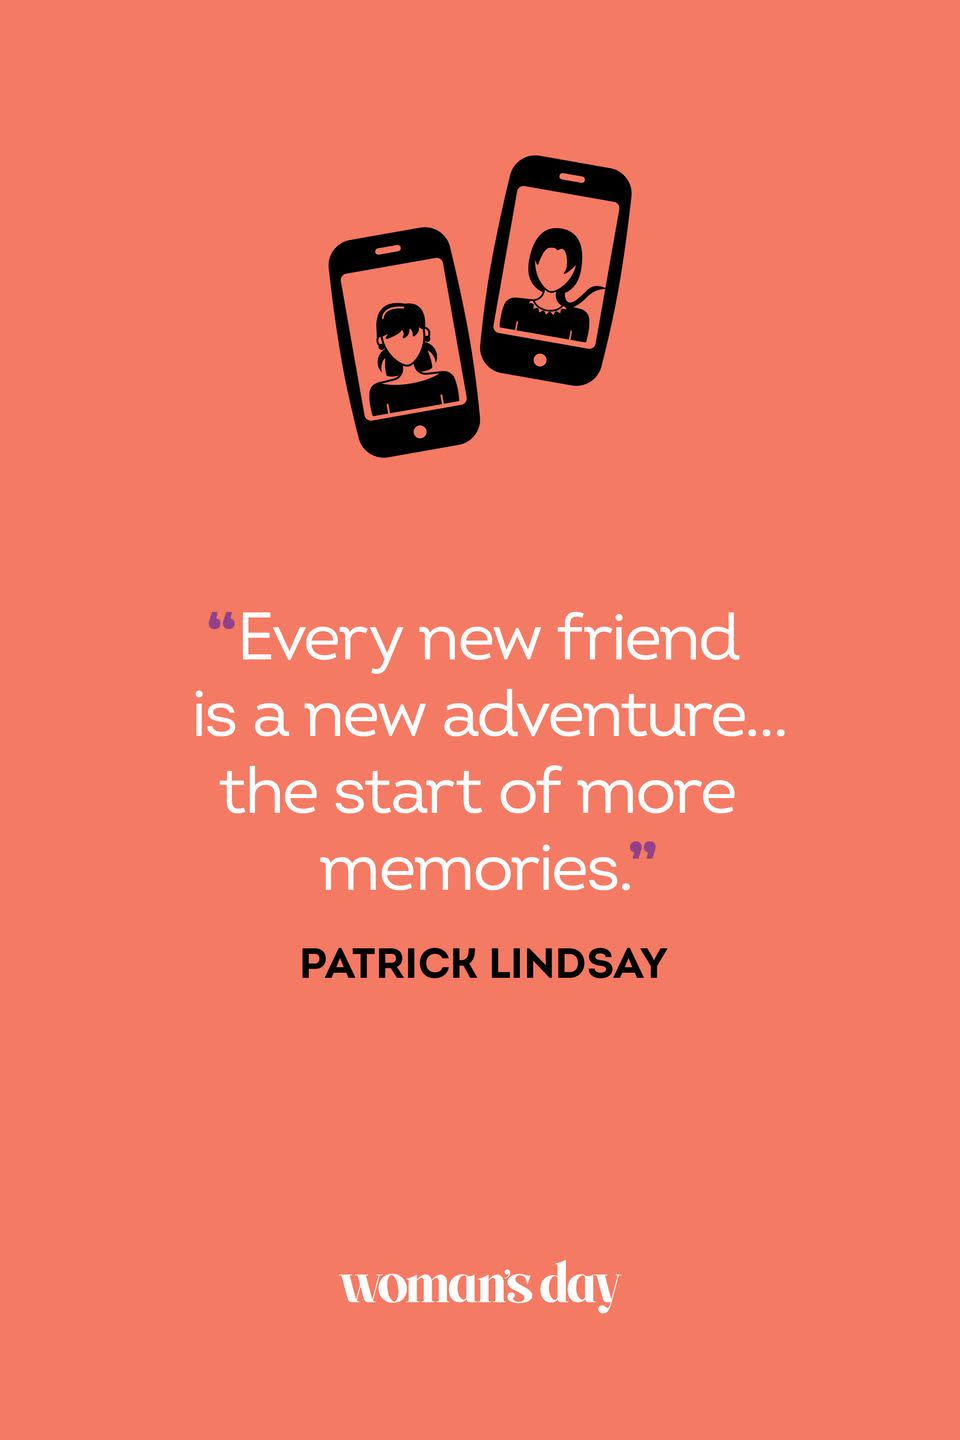 <p>“Every new friend is a new adventure… the start of more memories.”</p>